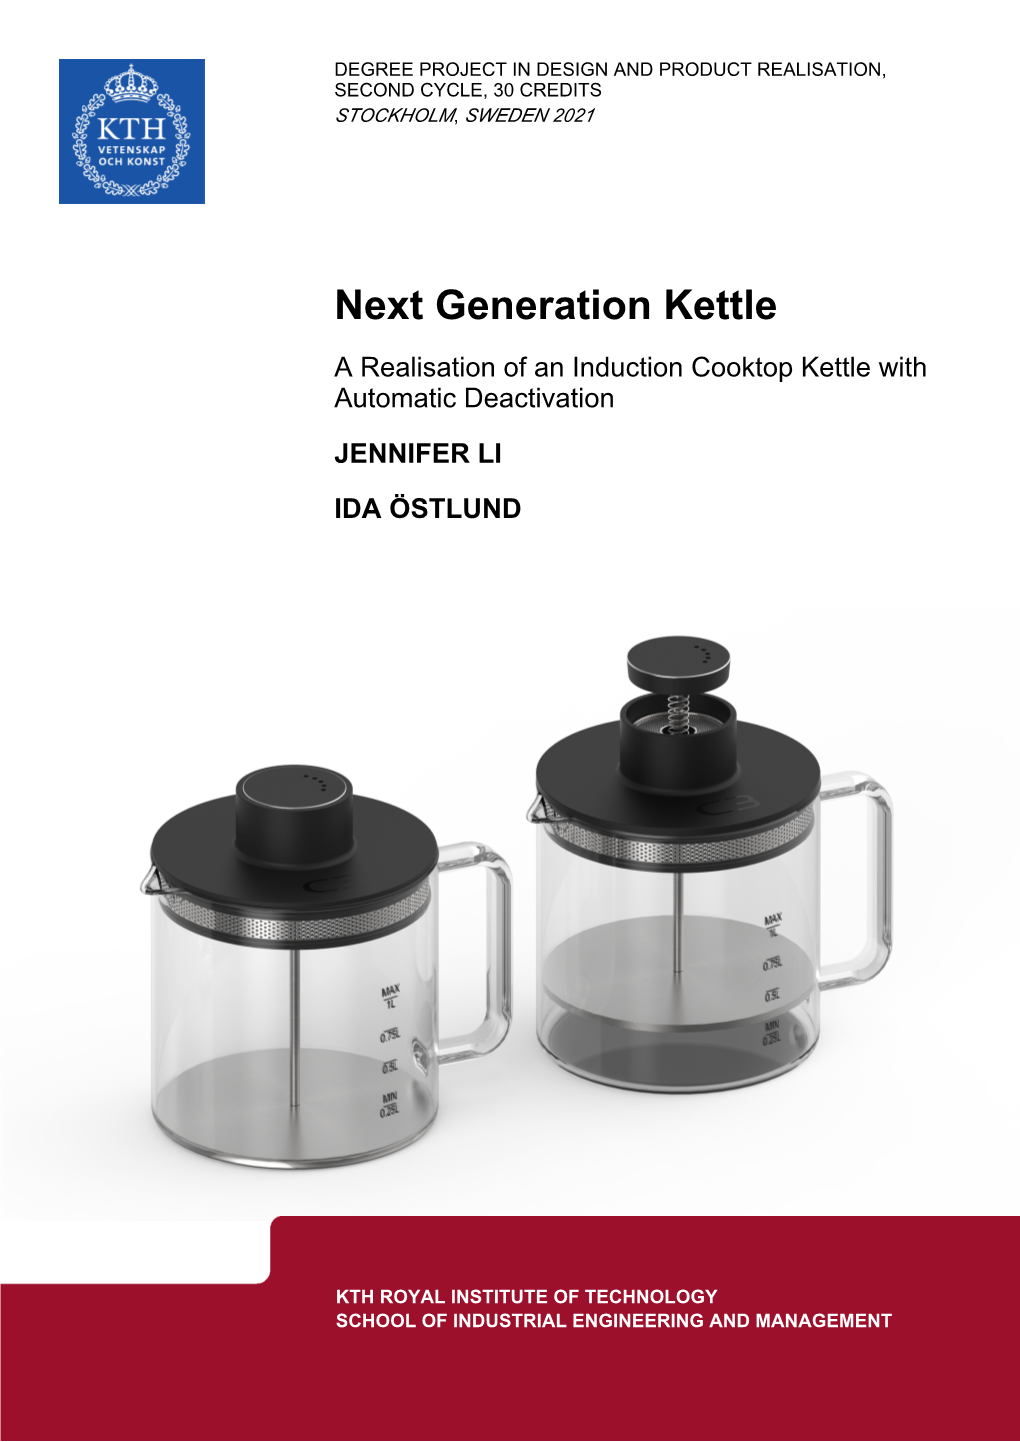 Next Generation Kettle a Realisation of an Induction Cooktop Kettle with Automatic Deactivation